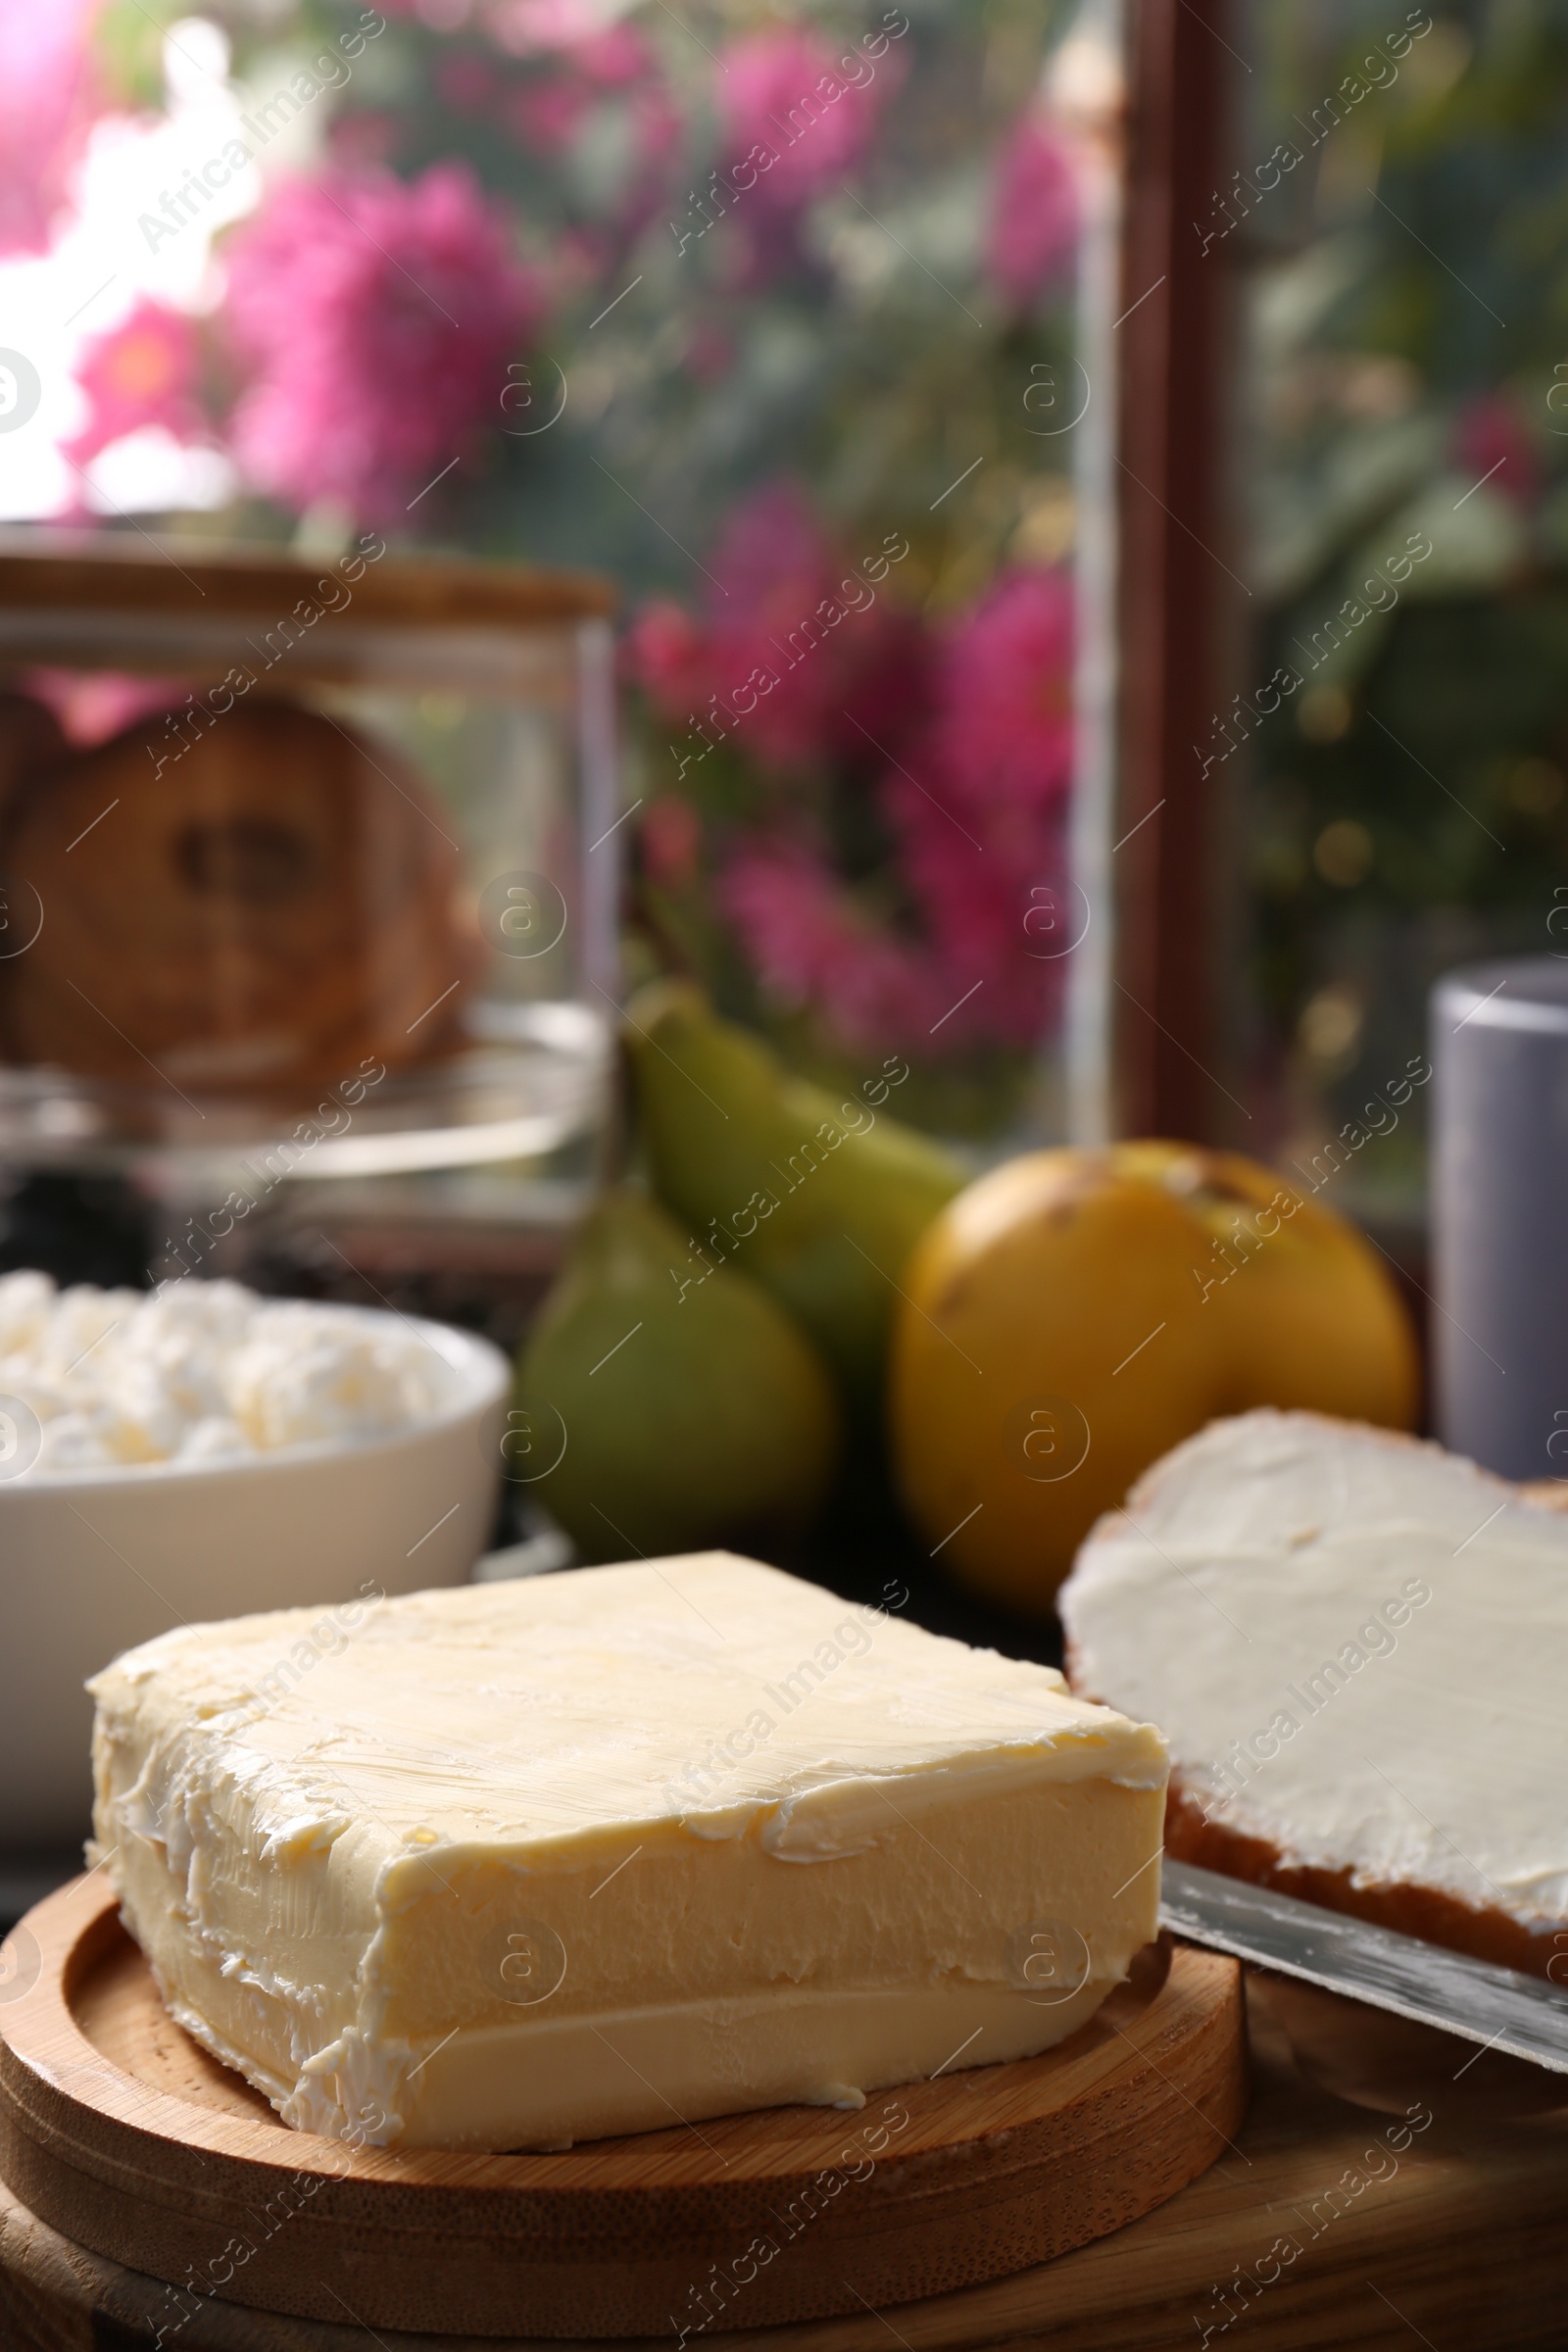 Photo of Tasty homemade butter, bread slices and tea on wooden table